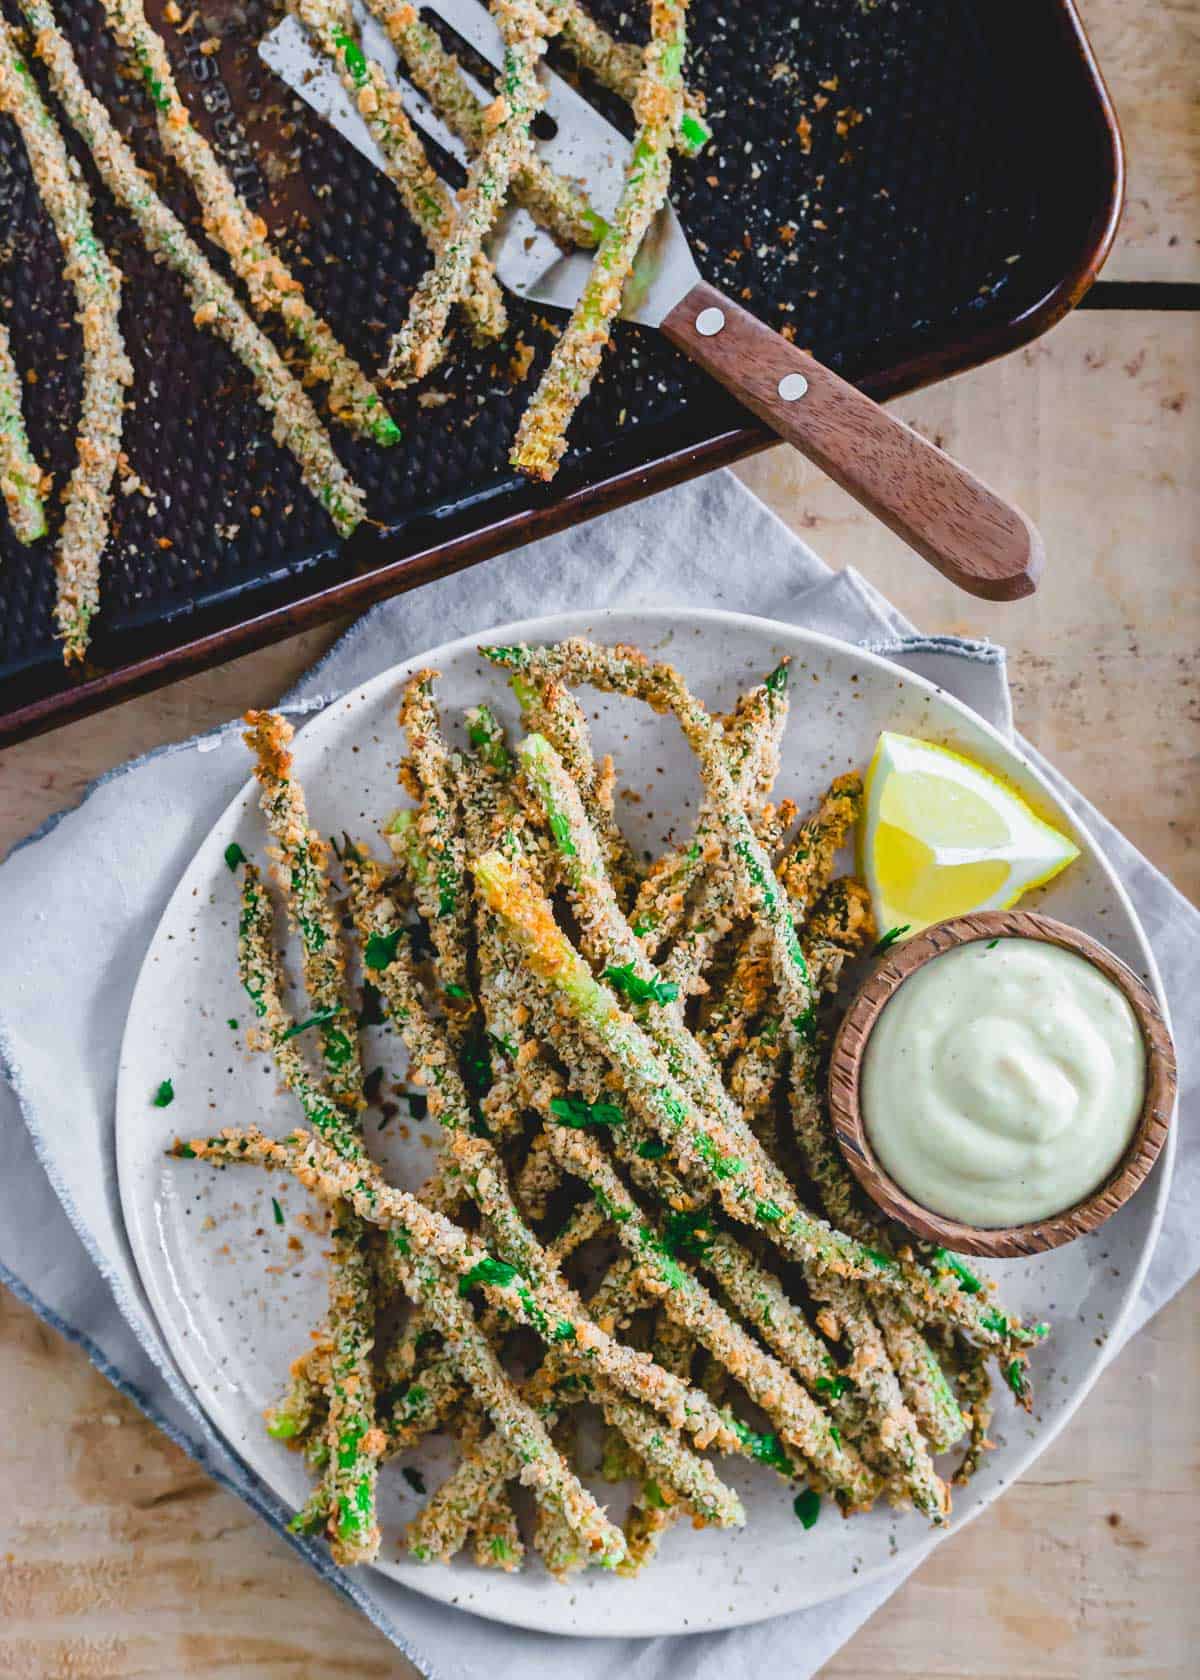 Crispy asparagus fries garnished with parsley on a plate with lemon dijon dipping sauce.